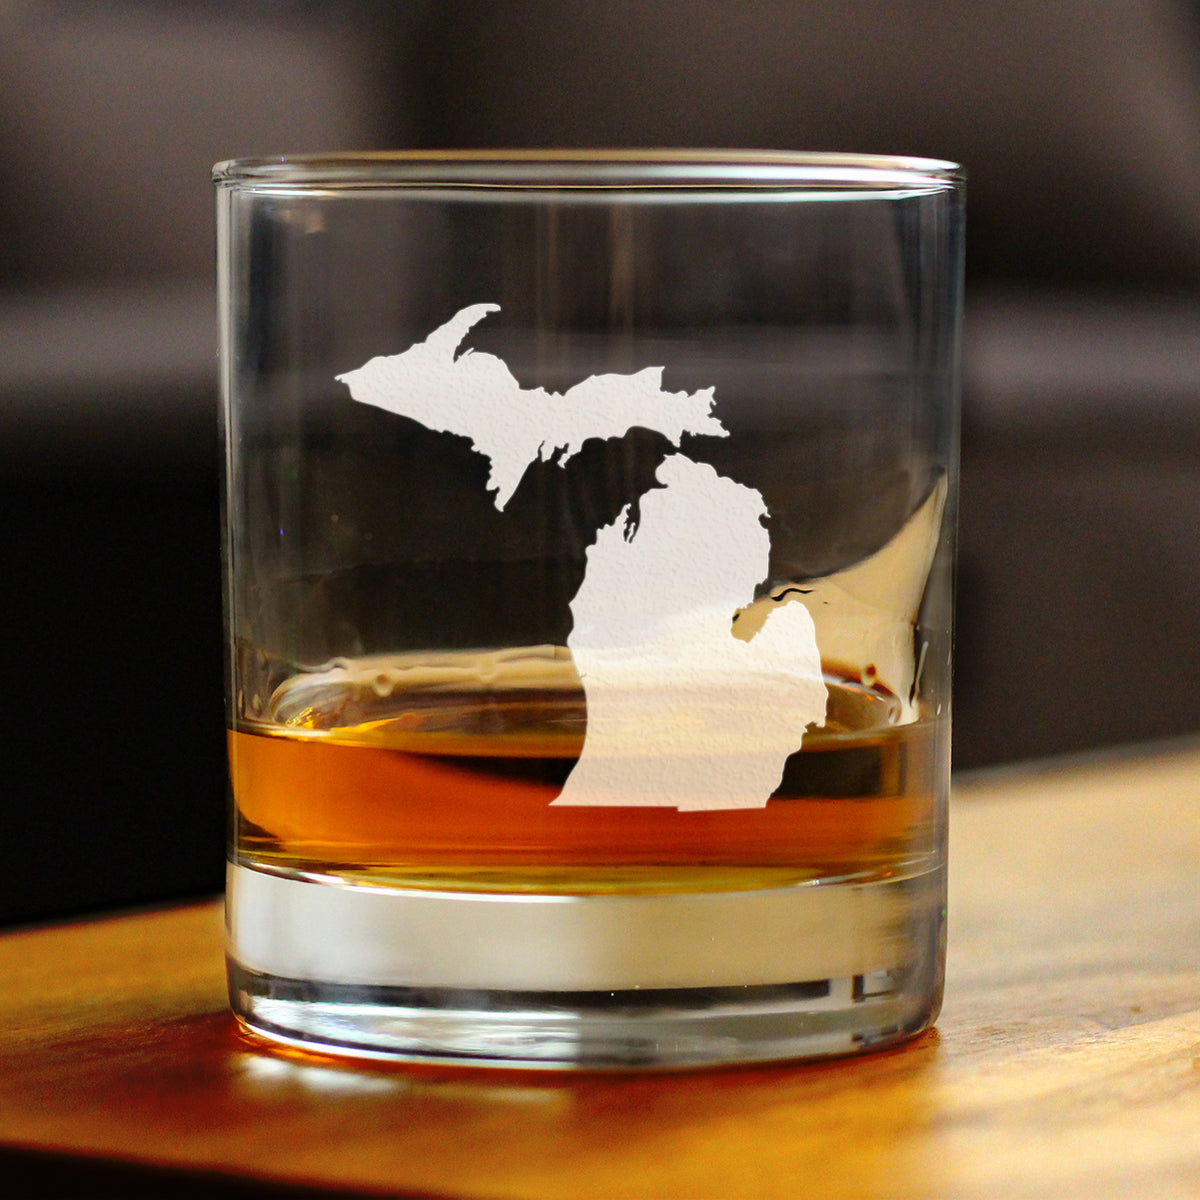 Michigan State Outline Whiskey Rocks Glass - State Themed Drinking Decor and Gifts for Michigander Women &amp; Men - 10.25 Oz Whisky Tumbler Glasses